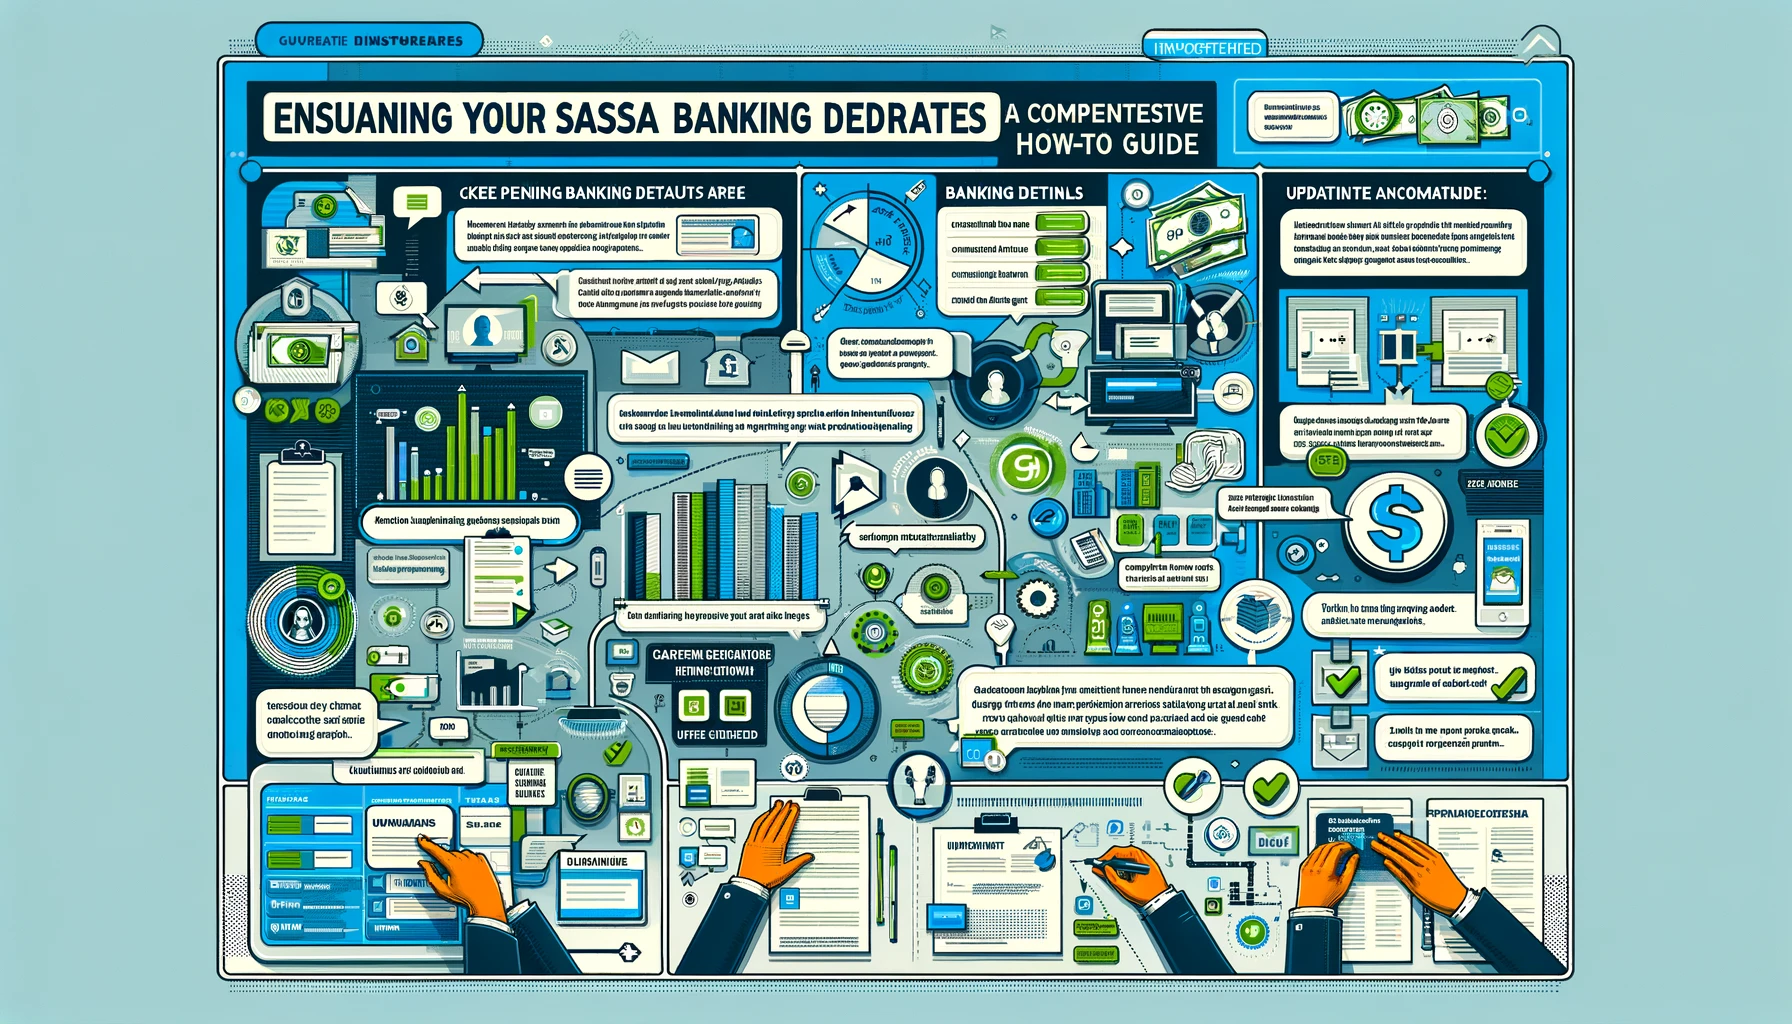 Updating SASSA Banking Details- A Comprehensive How-To